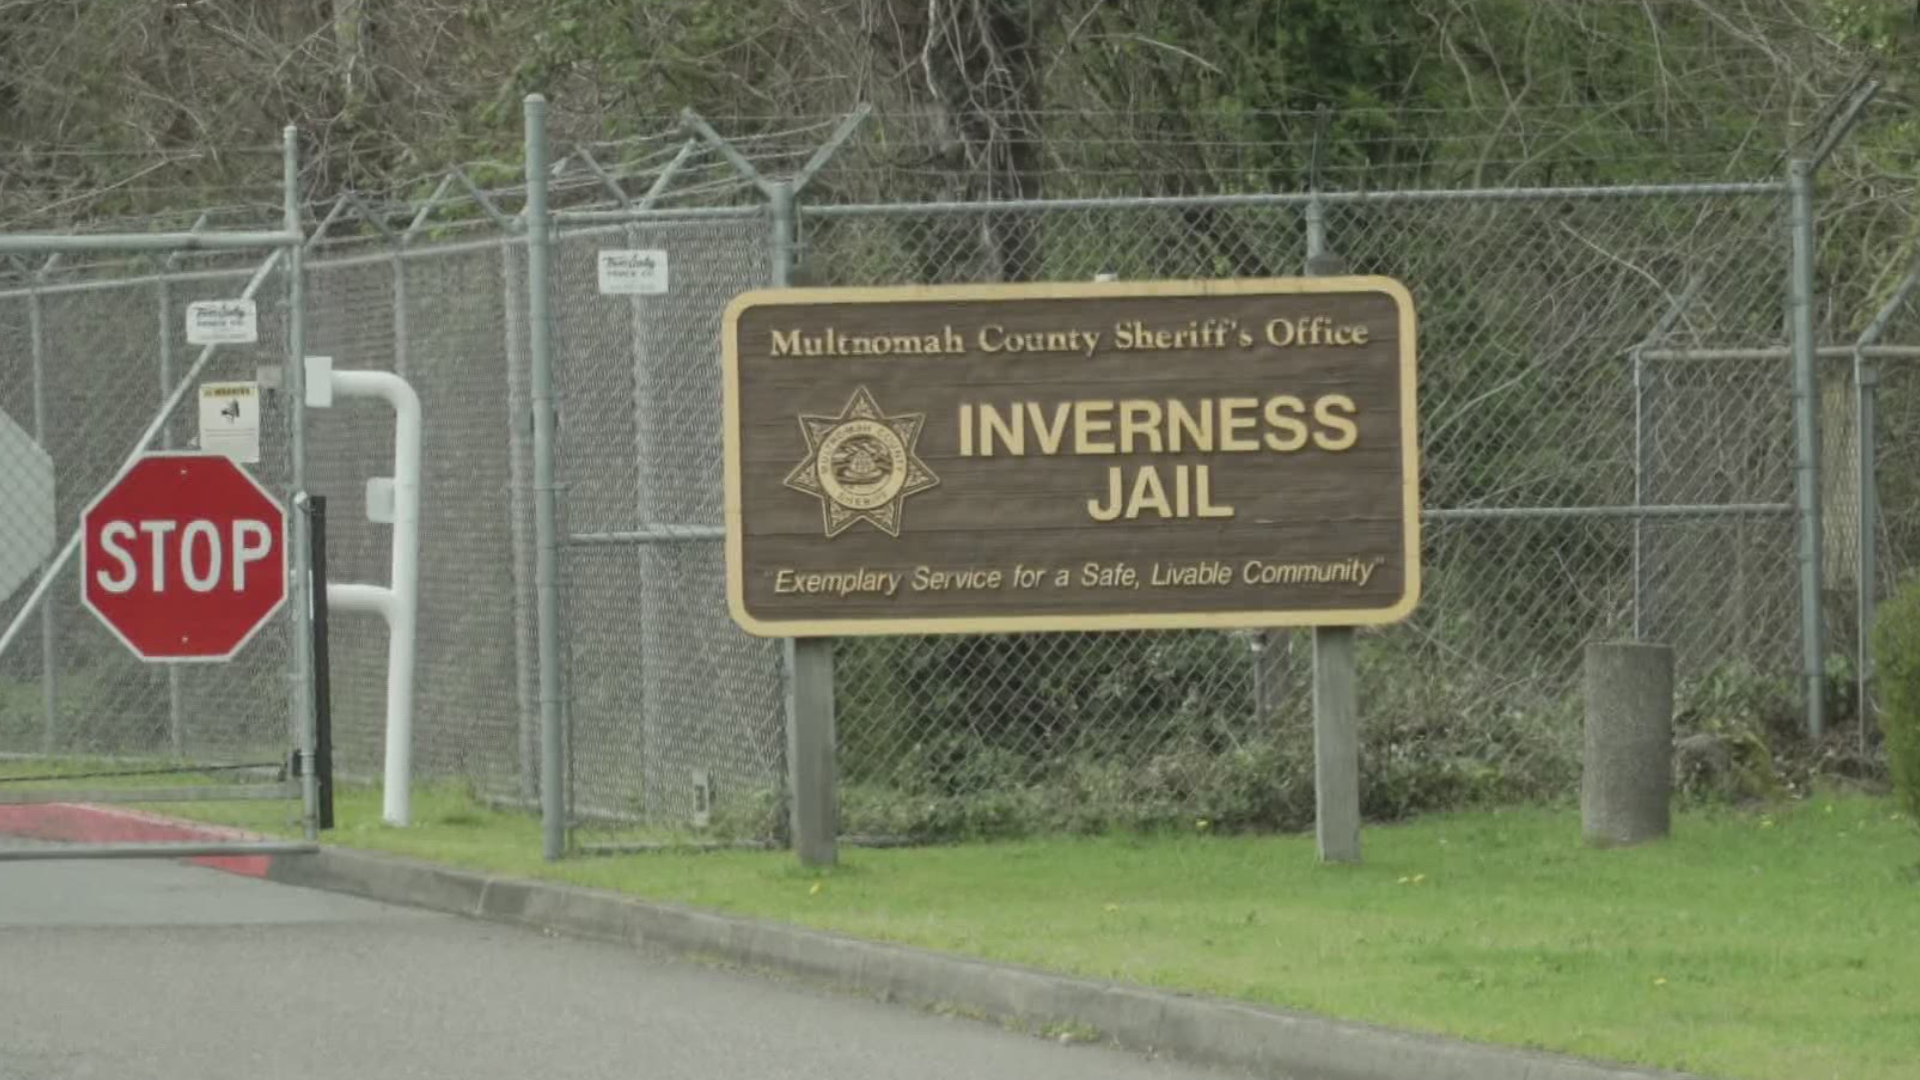 The lawsuit claims staff at the Multnomah County Inverness Jail was negligent and it led to many illnesses.